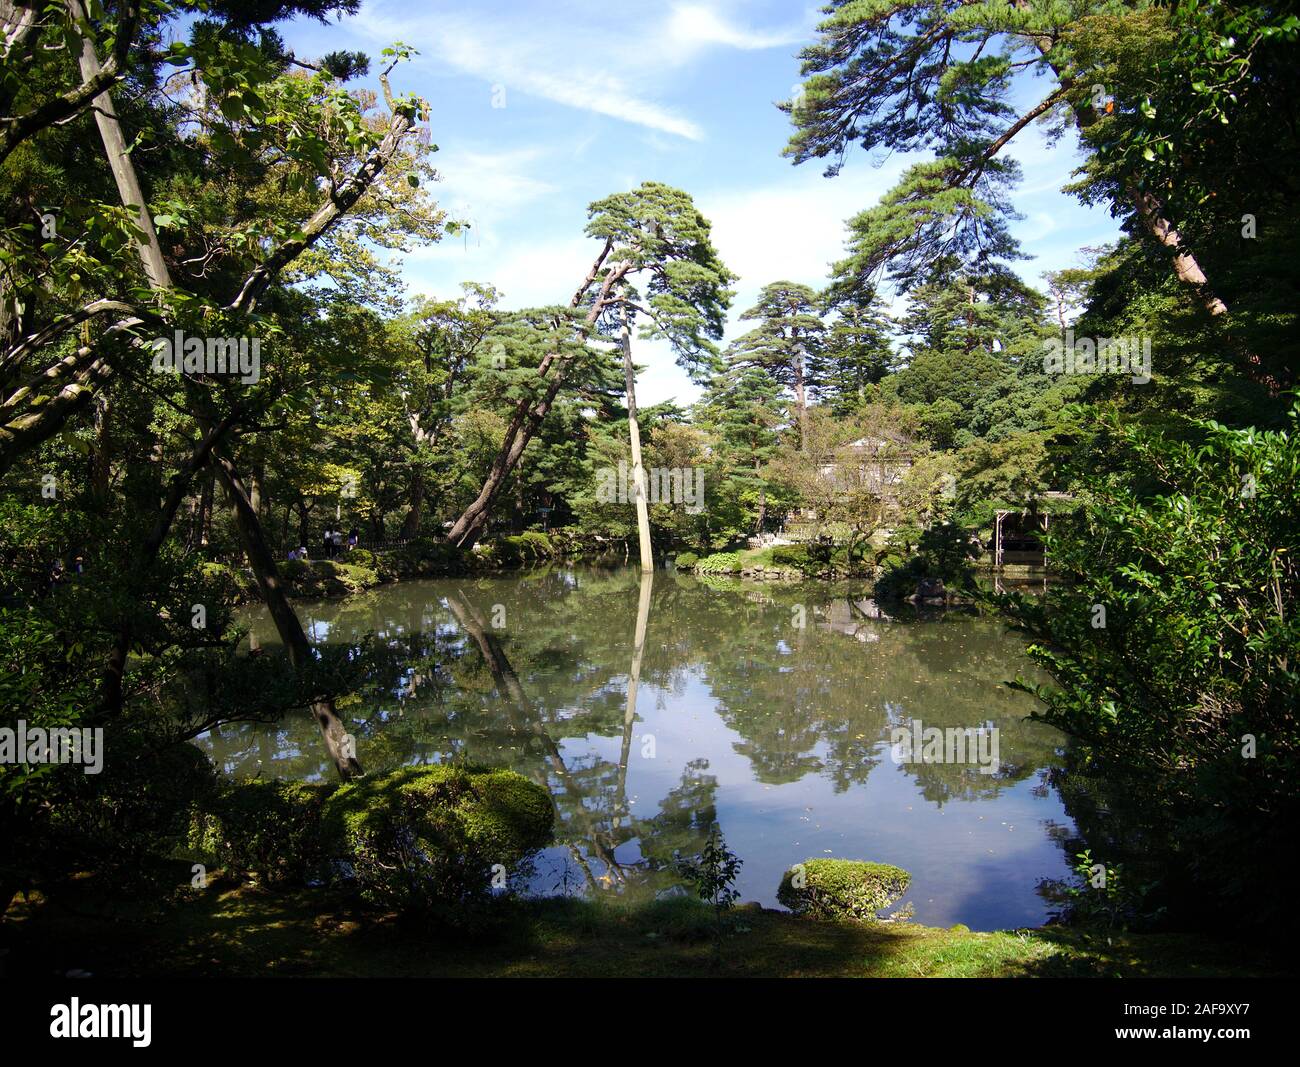 A Maple tree is propped up by a pole over Hisago ike pond in Kenroku-en Garden. Stock Photo